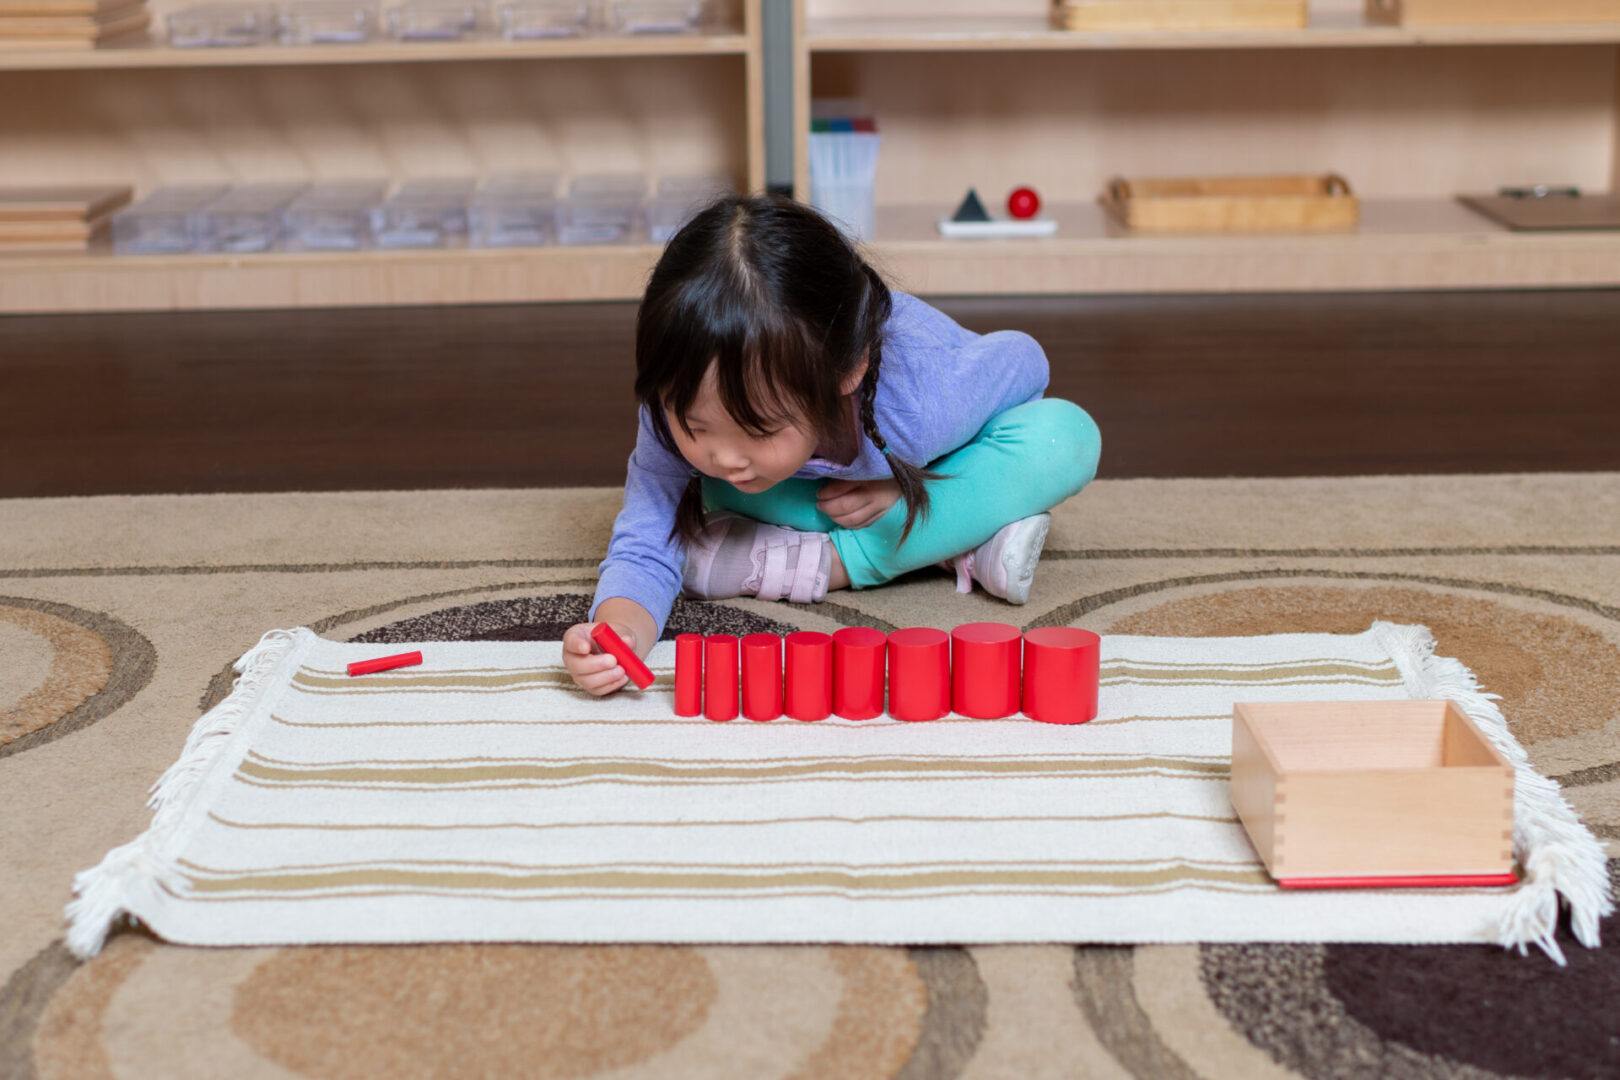 A cute little girl playing with wooden blocks